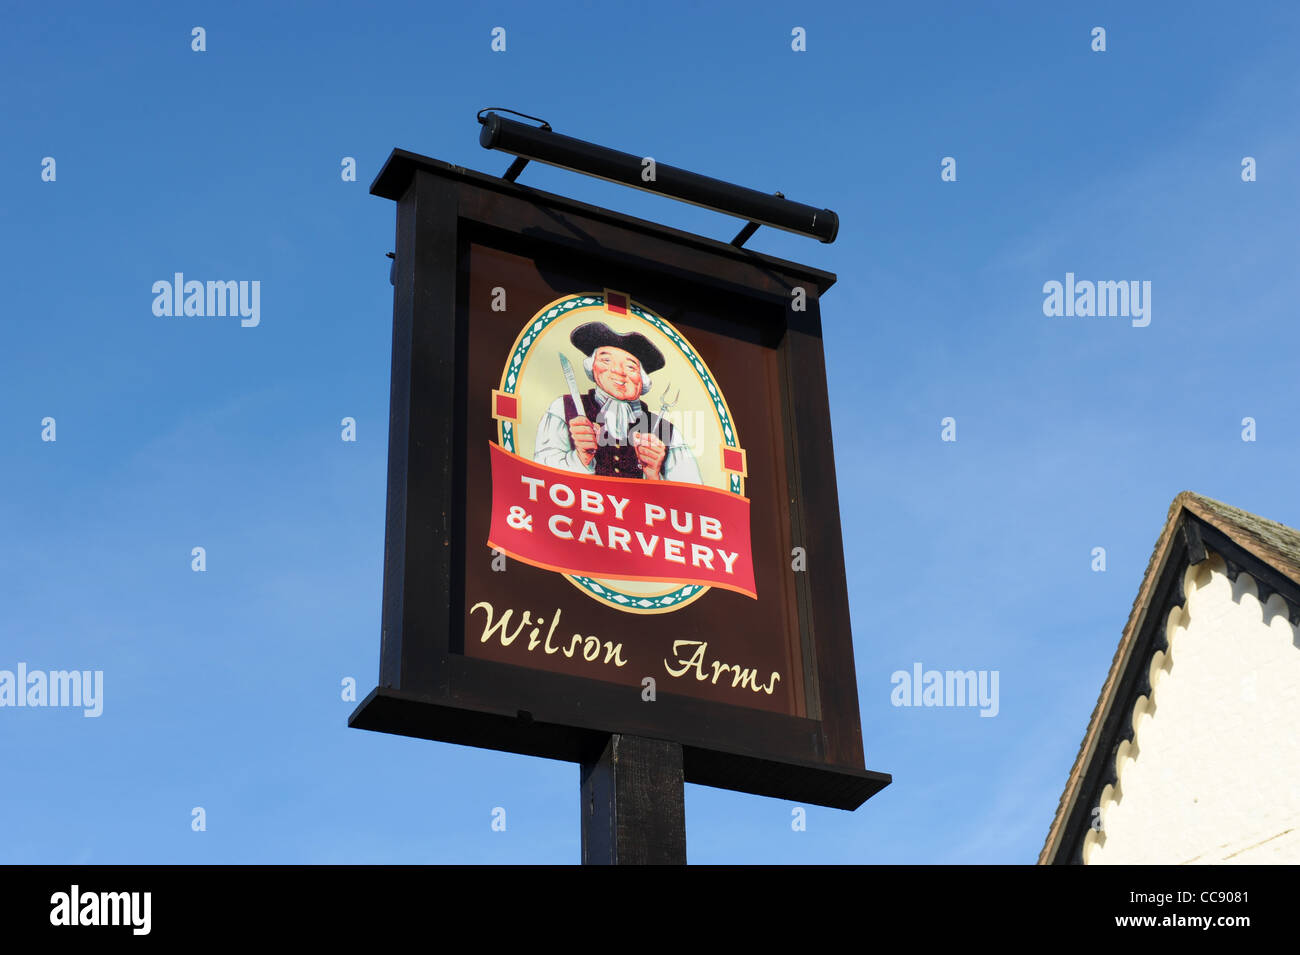 Wislon Arms pub sign in Knowle in Warwickshire England Uk Stock Photo